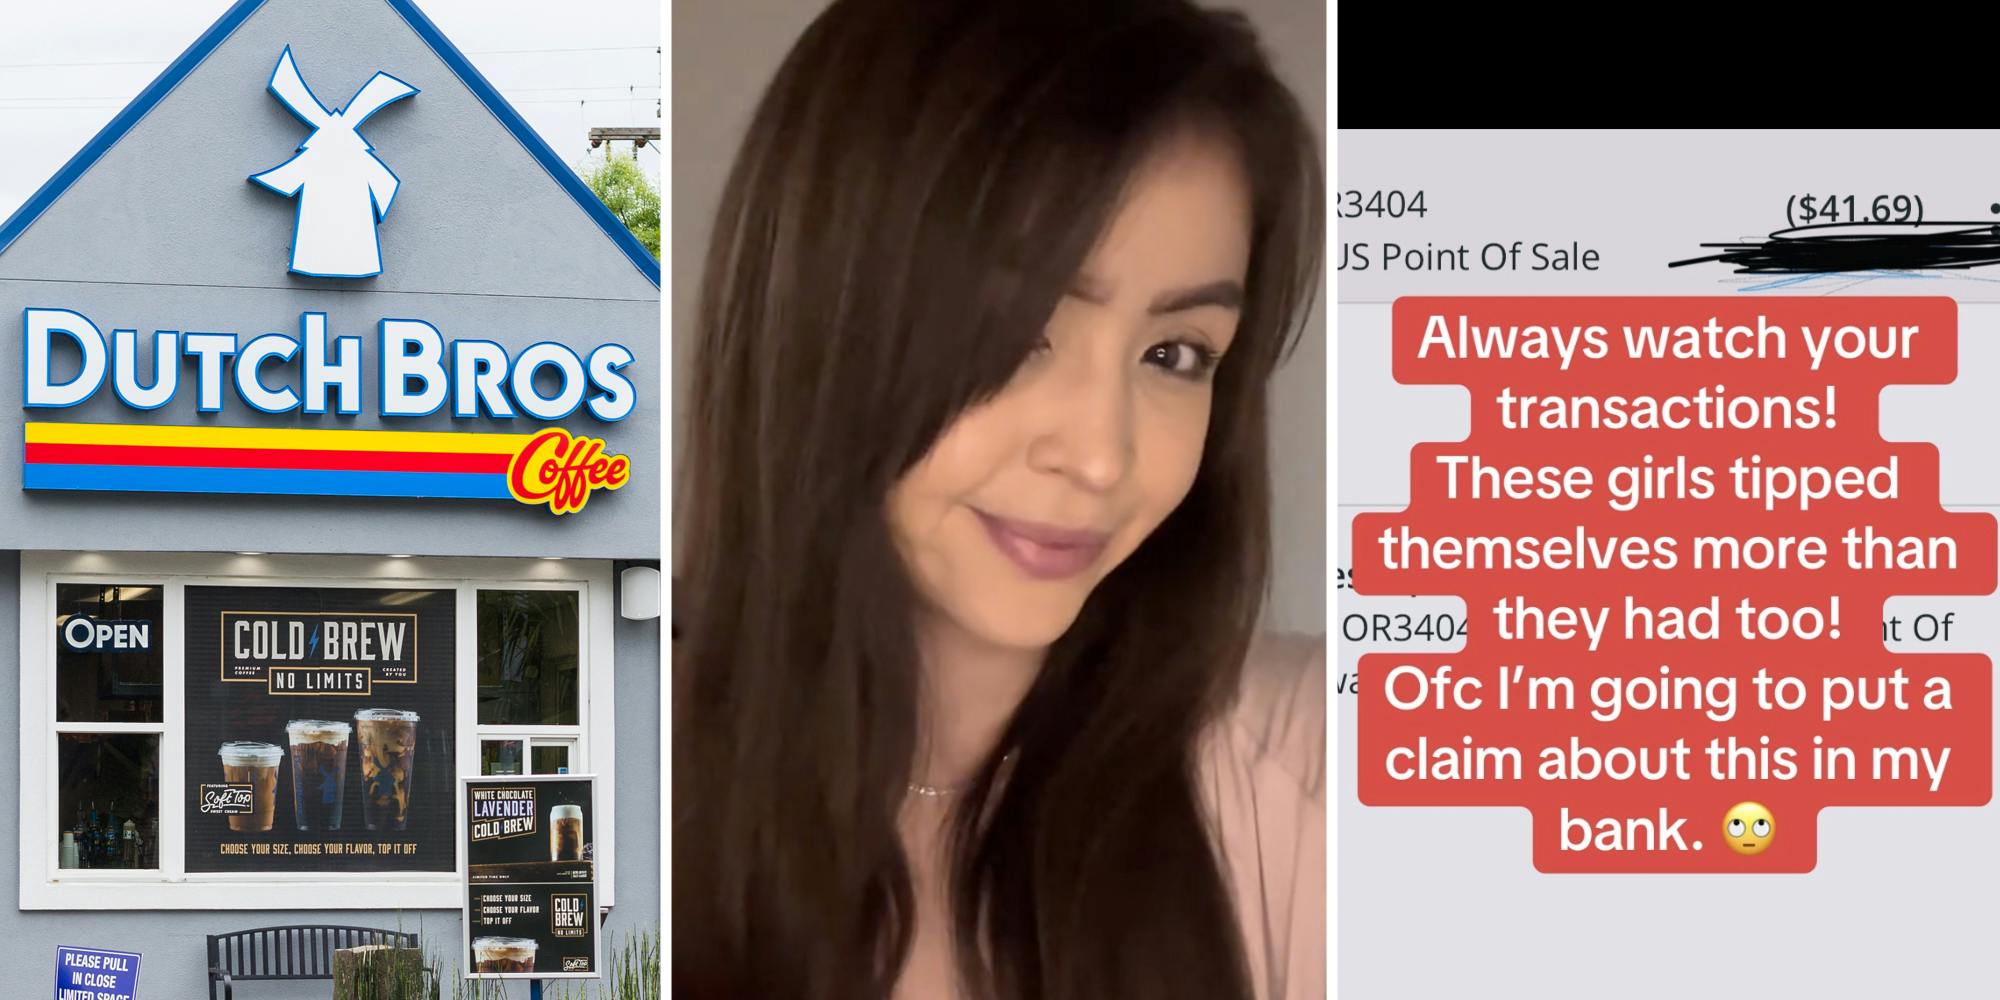 Dutch Bros storefront(l), Woman smiling(c), Screenshot that says "Always watch your transactions! These girls tipped themselves more than they had too! Ofc I'm going to put a claim about this in my bank. Rolling eyes emoji"(r)